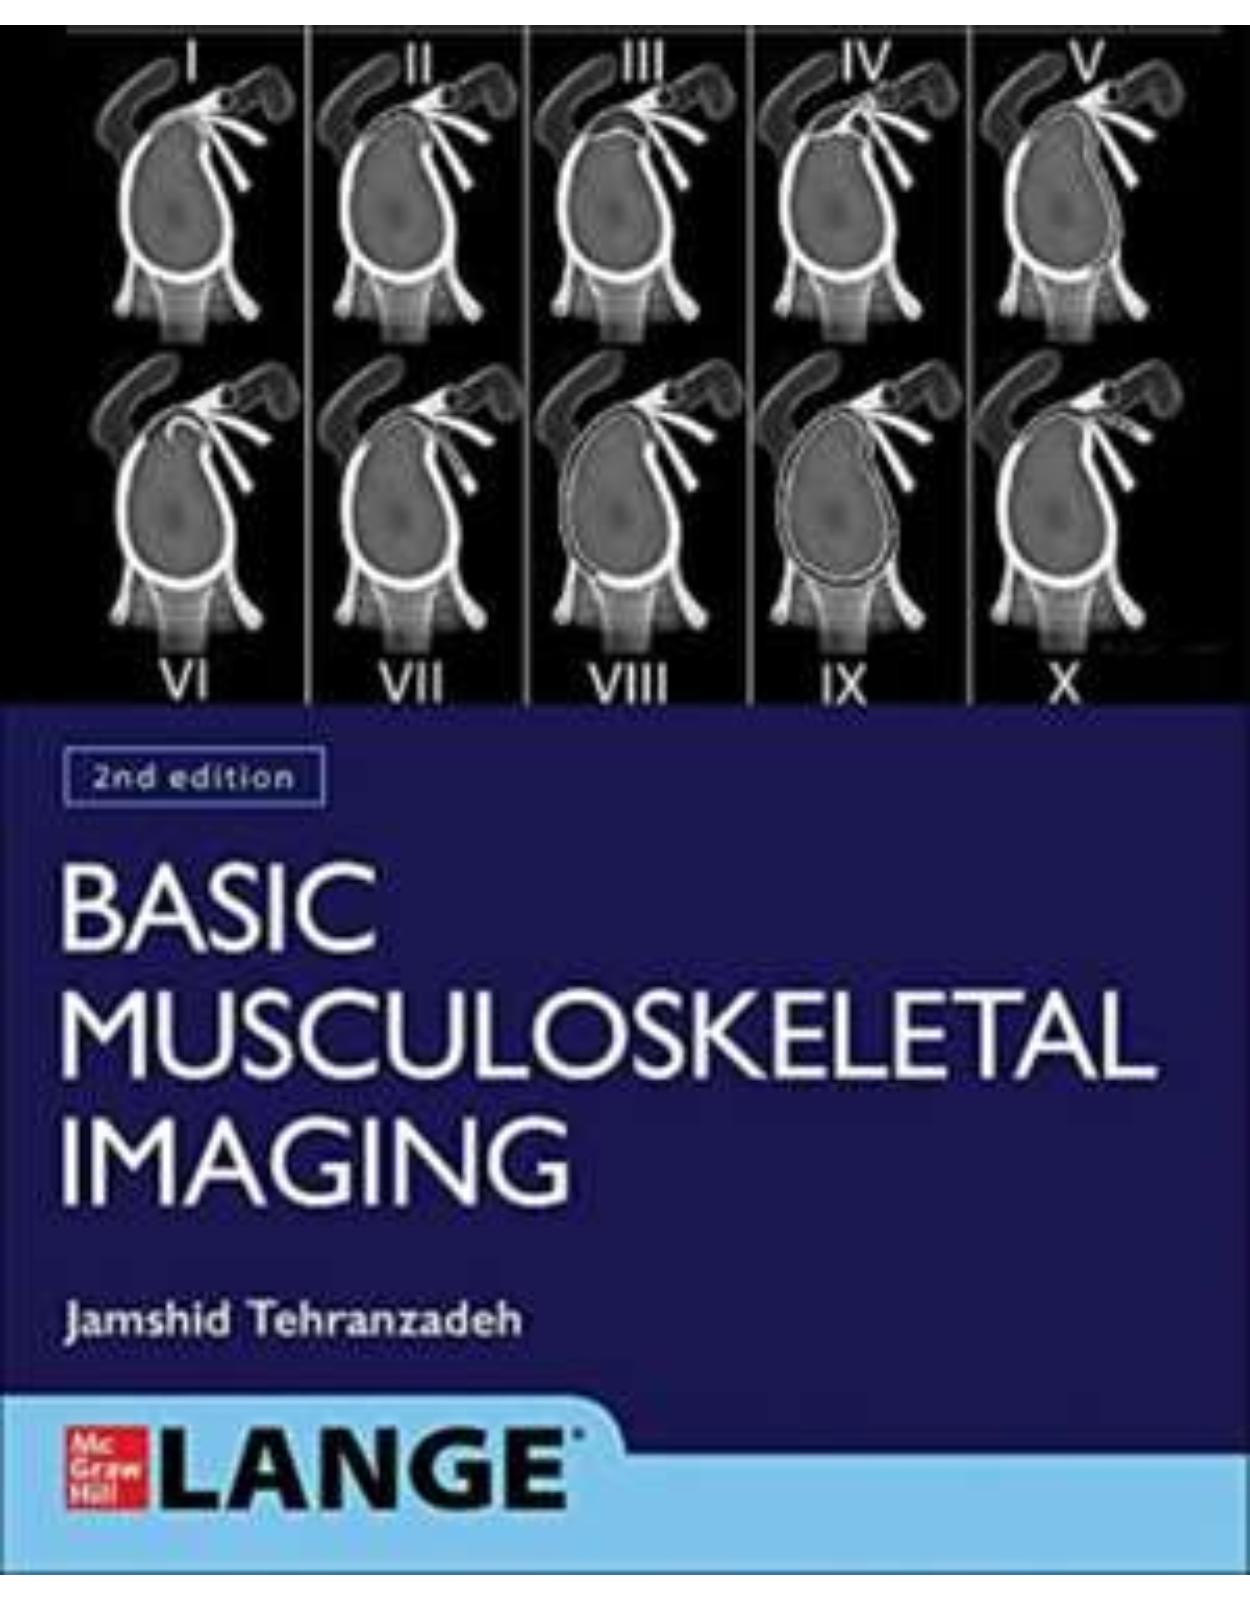 Basic Musculoskeletal Imaging, Second Edition